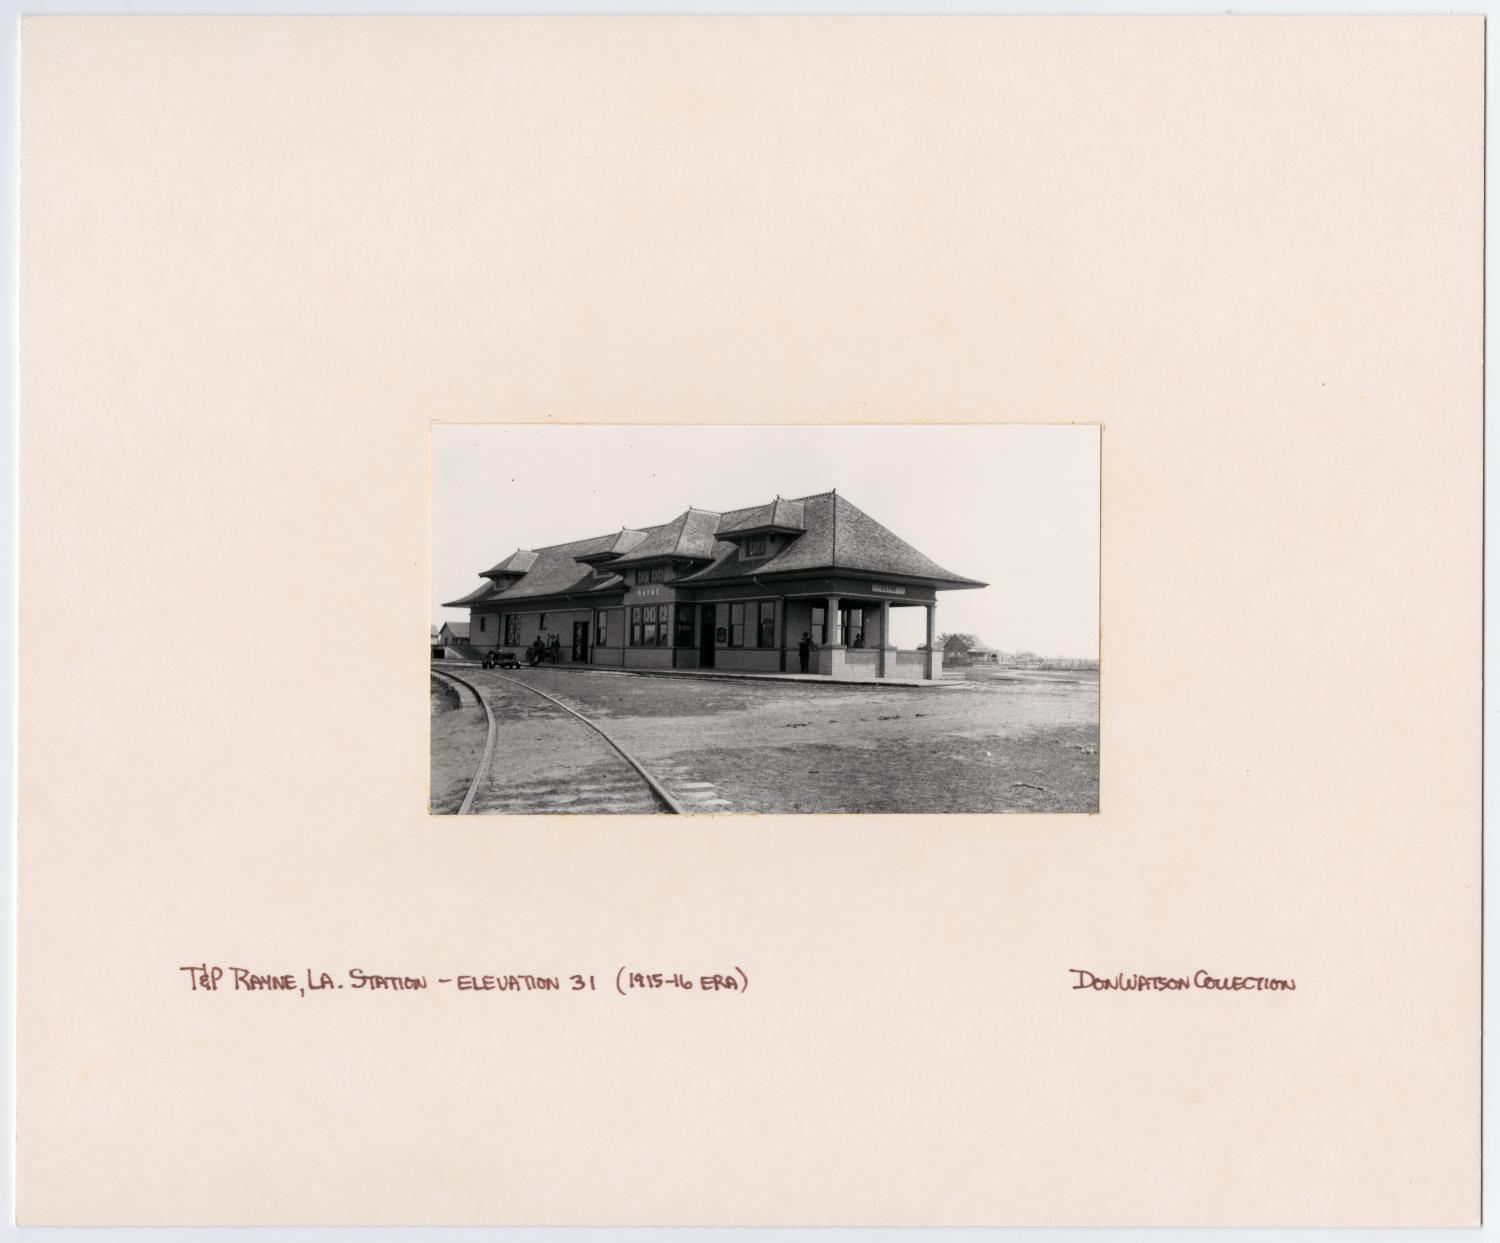 Images of Texas & Pacific Stations and Structures in Rayne, LA